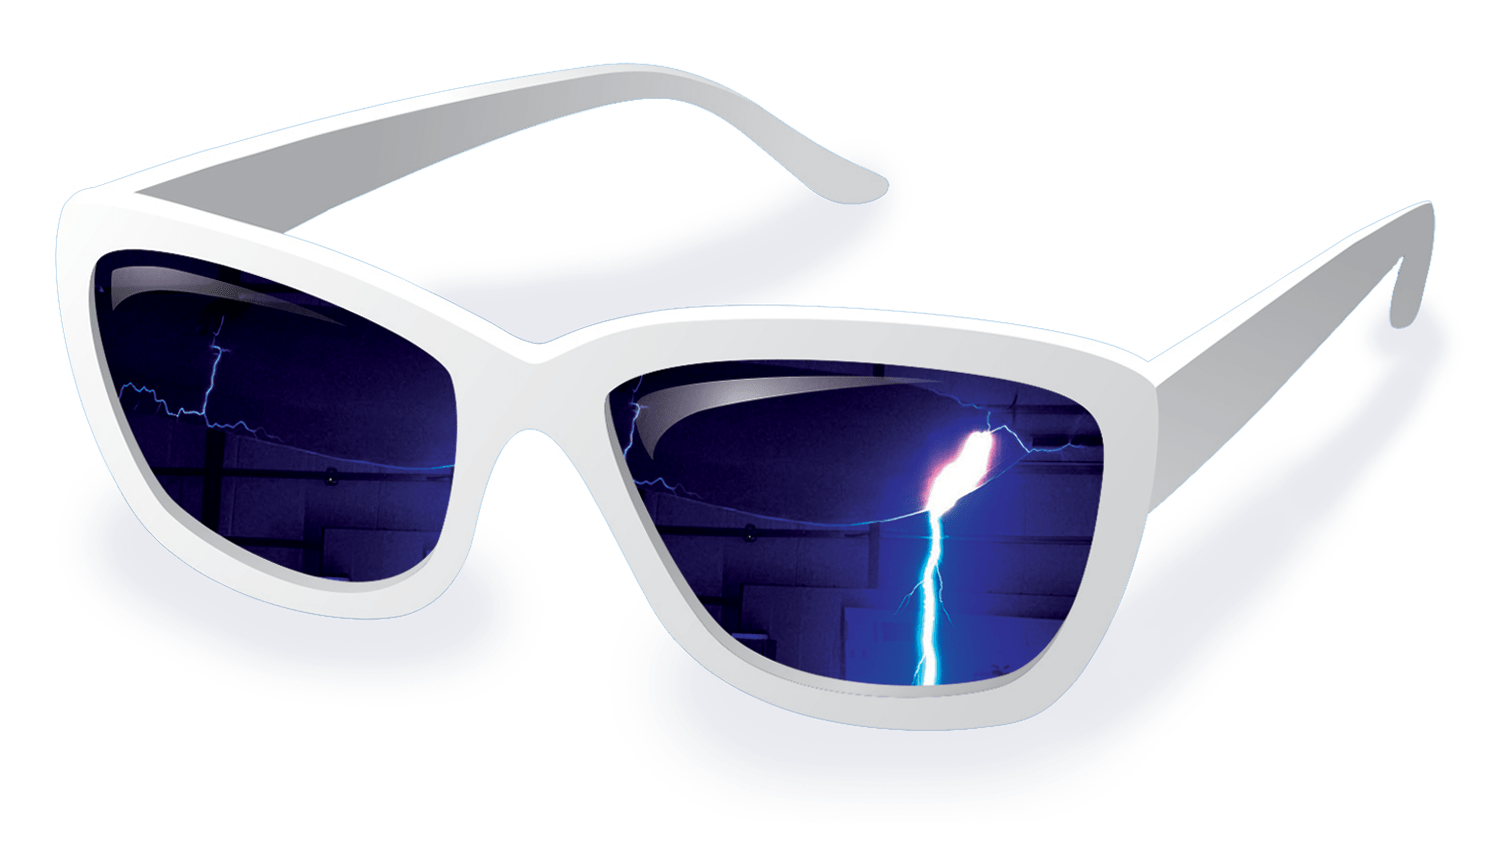 Sunglasses with lighting reflection